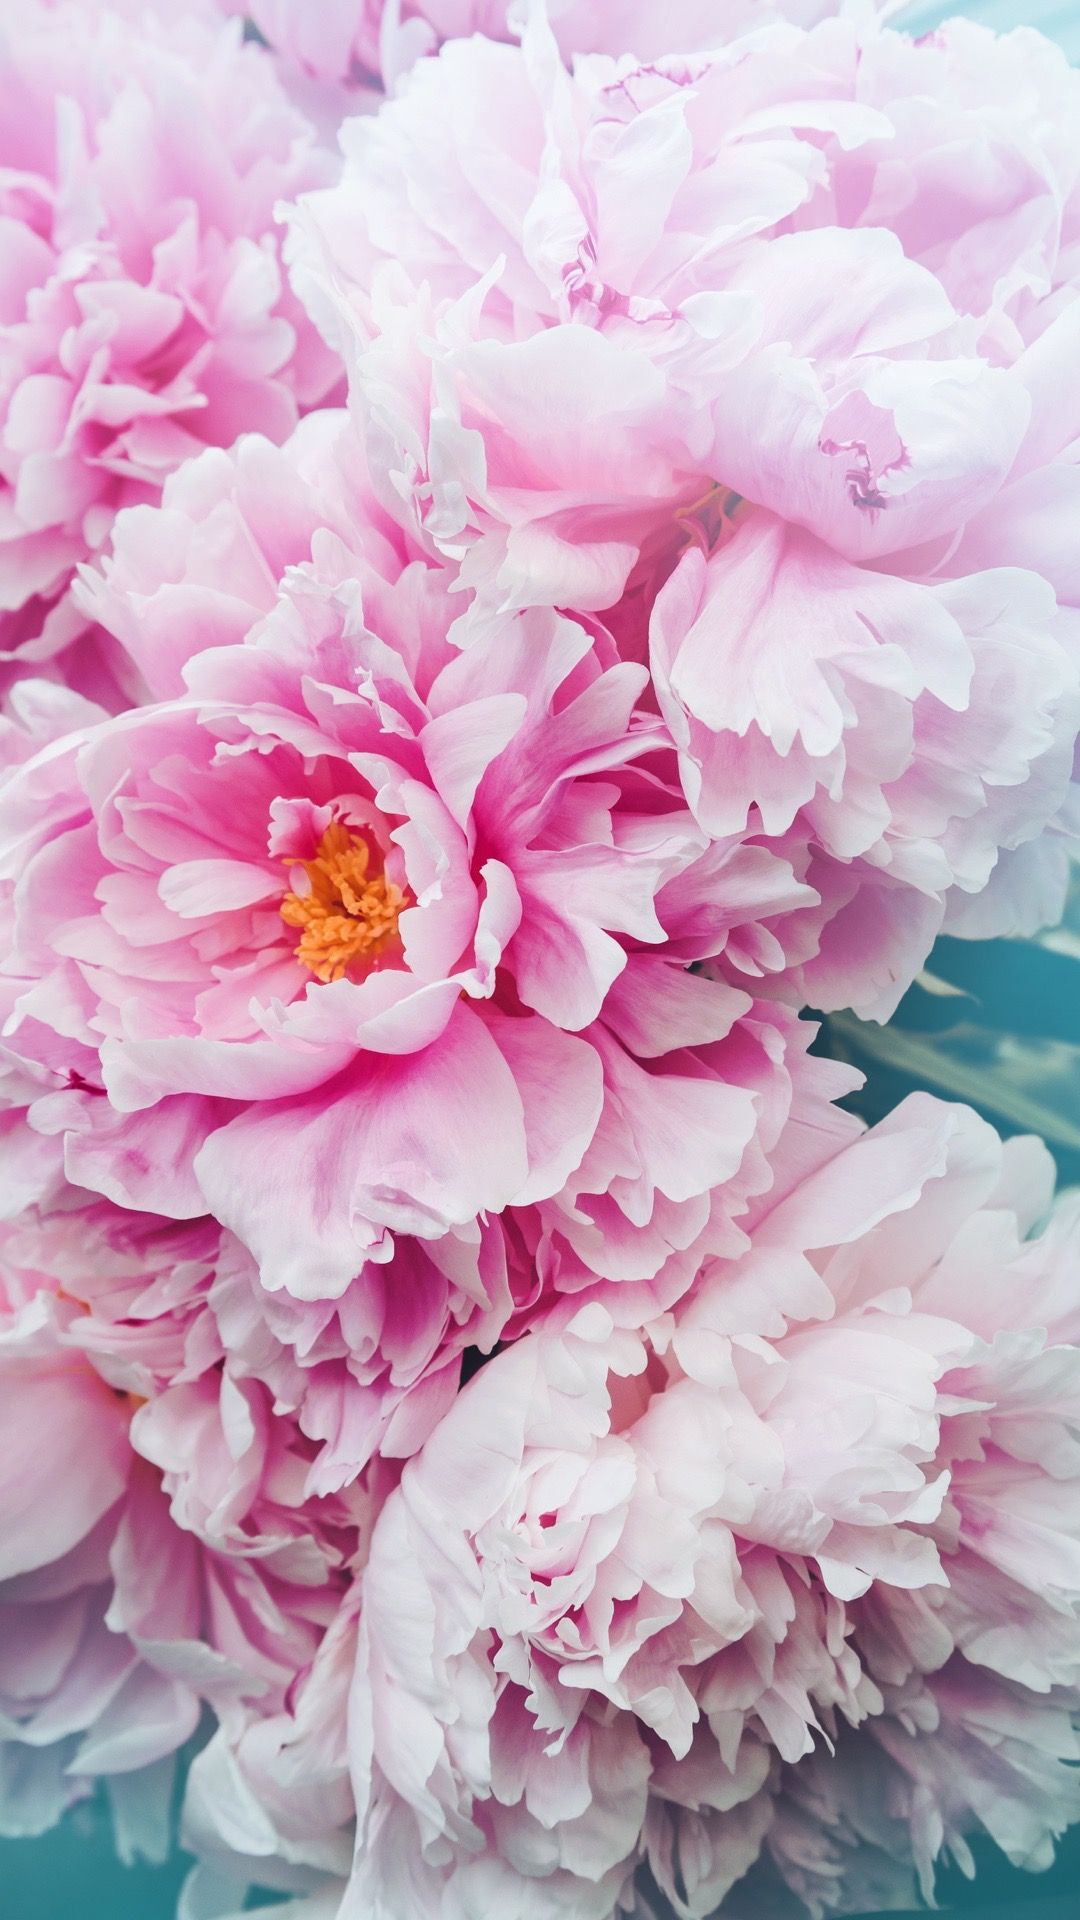 1080x1920 Pin by Sarah on Nature | Pink flowers wallpaper, Pink peonies wallpaper, Amazing flowers